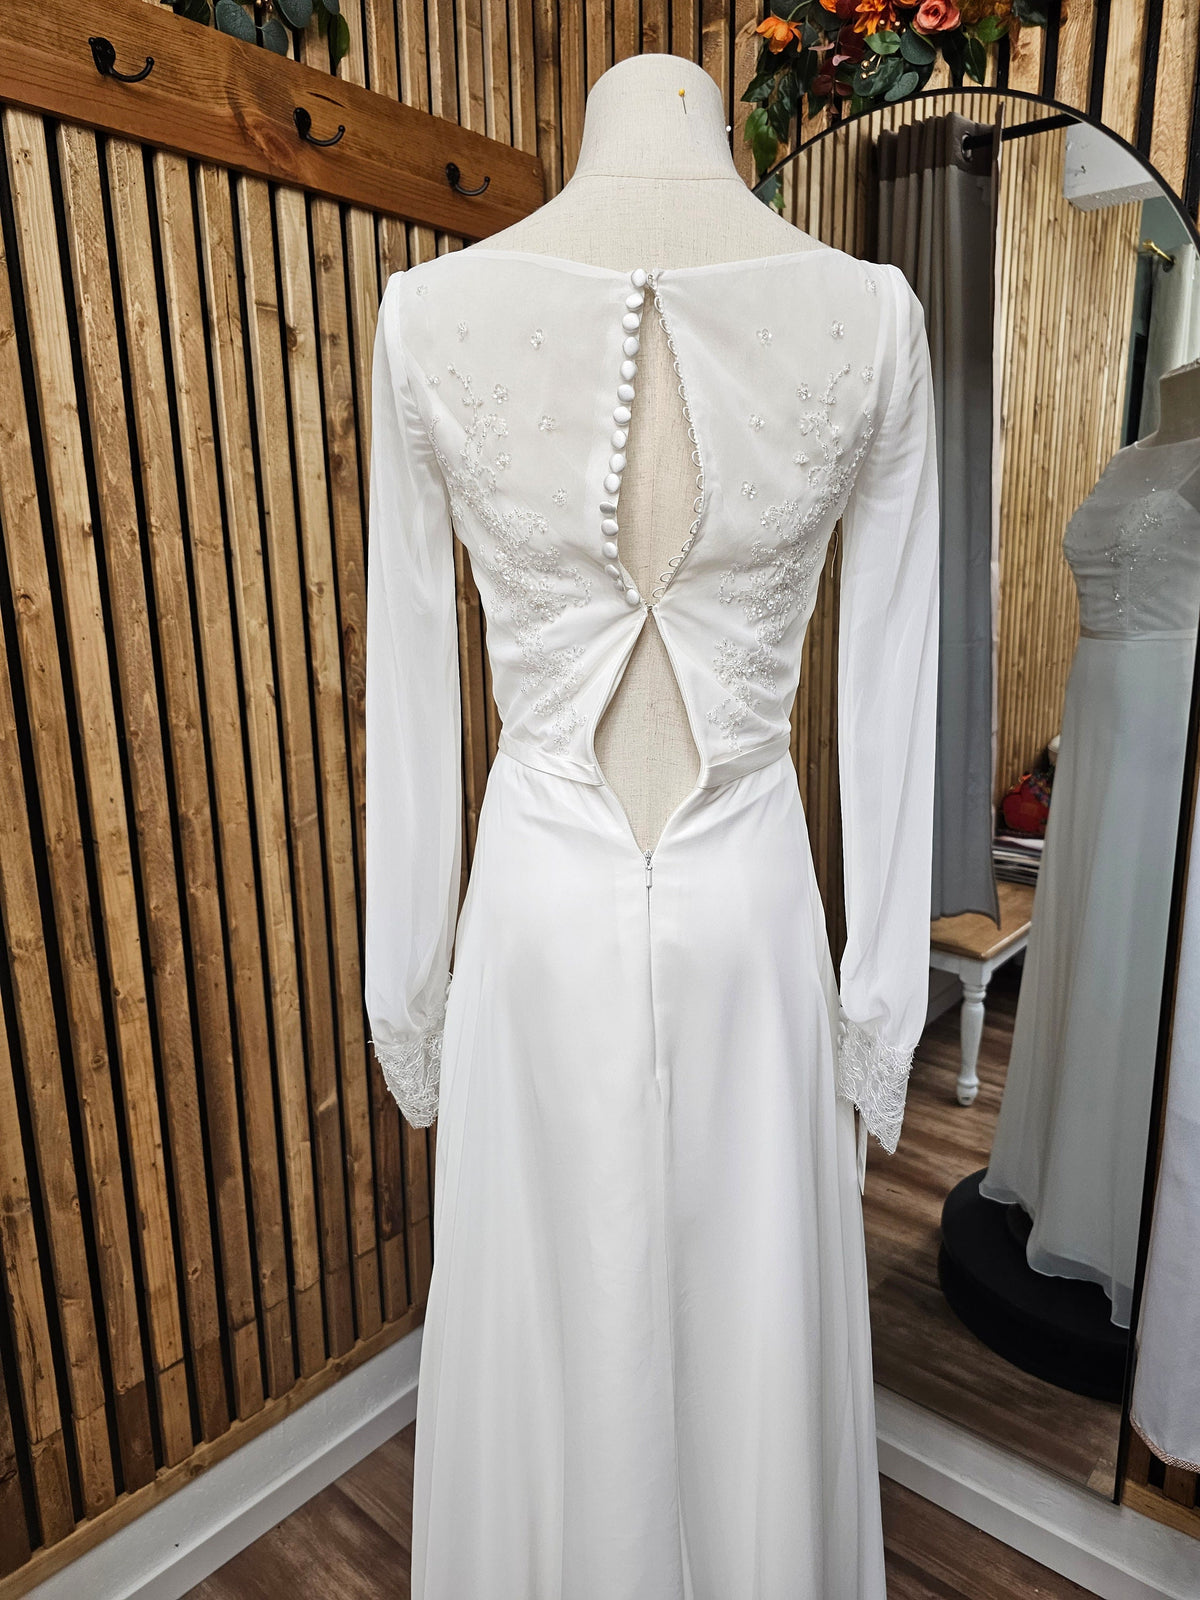 Vintage Style Boat Neckline Long Sleeves Minimalist Chiffon ALine Wedding Dress Bridal Gown Short Train Covered Back Buttons Lace